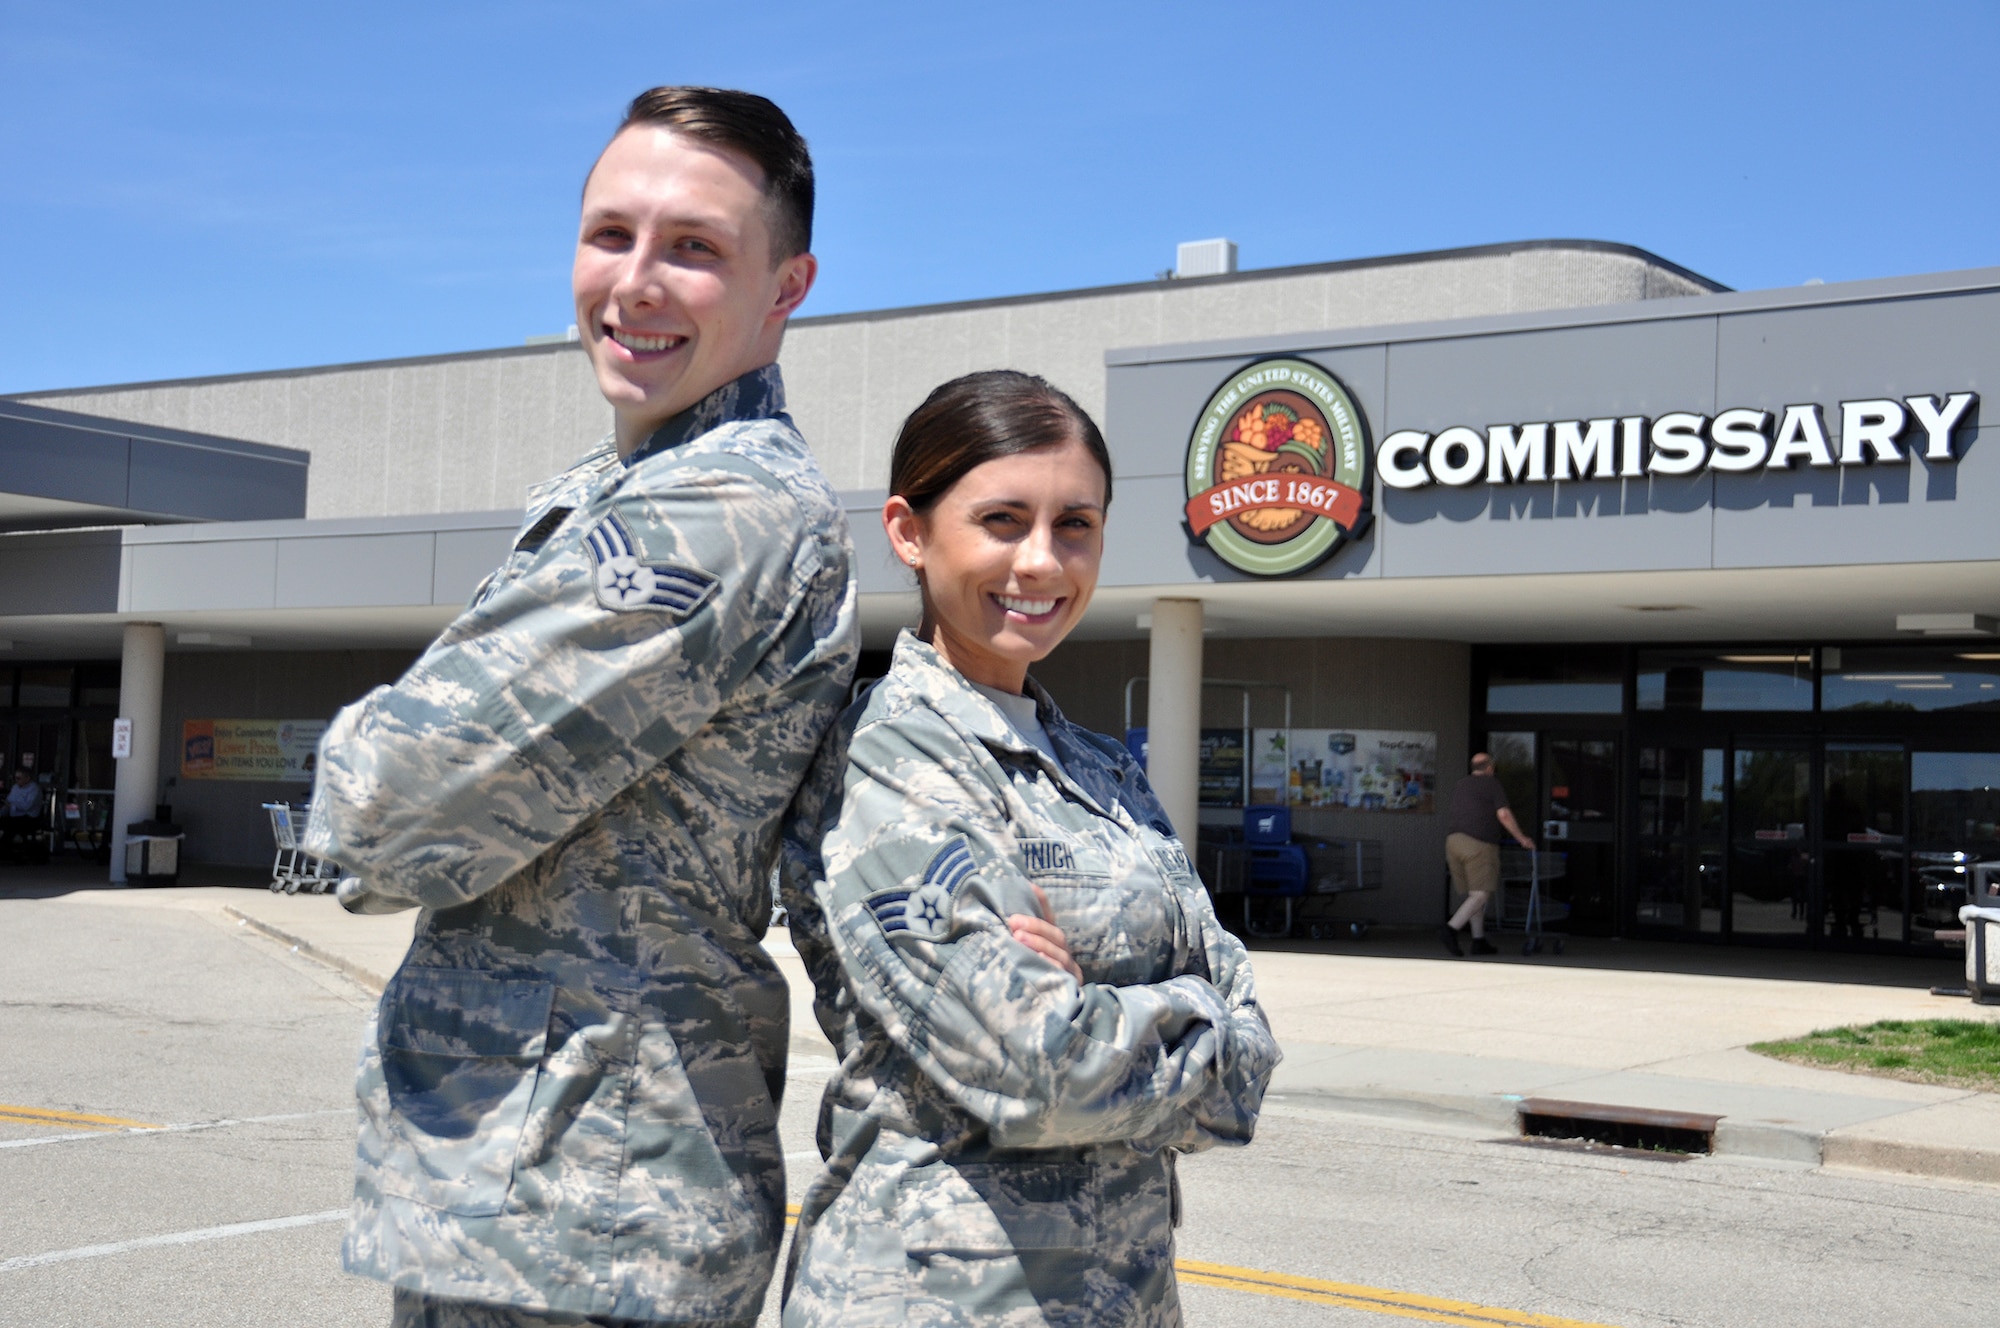 Senior Airmen Kassandra Minigh and Collin Millar, 14th Intelligence Squadron all-source analysts, provided aid to a customer having a seizure at the Wright-Patterson Air Force Base commissary March 27, 2019. Their efforts helped save the woman’s life.